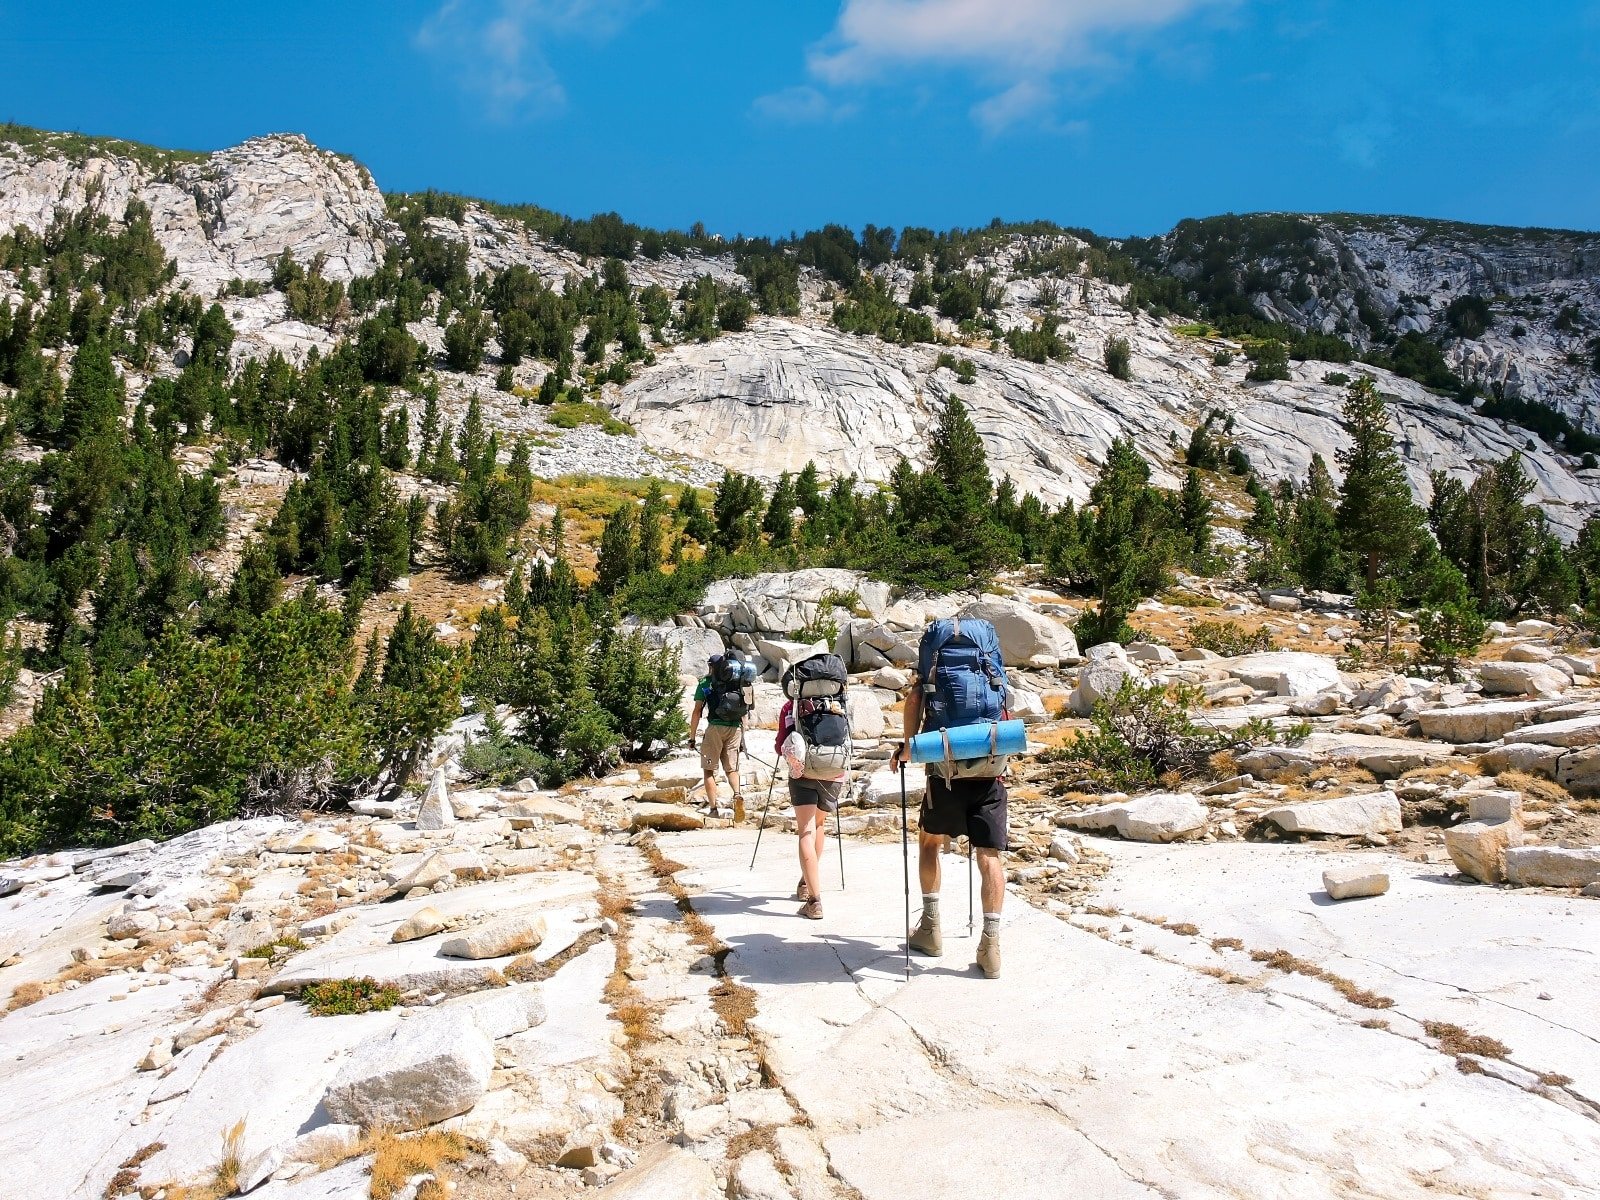 <p><span>Embark on an epic journey through the heart of California’s Sierra Nevada mountain range on the John Muir Trail. This path encapsulates the raw beauty of the American wilderness. Spanning 211 miles from Yosemite Valley to Mount Whitney, this trail offers some of the most breathtaking scenery in the United States.</span></p> <p><span>As you trek through this diverse landscape, you’ll encounter majestic waterfalls, serene alpine lakes, and some of the tallest peaks in the contiguous United States. The trail, named in honor of the renowned naturalist John Muir, highlights the beauty he worked to preserve. It winds through iconic wilderness areas, including Yosemite, Kings Canyon, and Sequoia National Parks, each offering its own unique beauty and challenges.</span></p> <p><span>The journey typically takes about three weeks, traversing through deep canyons, high mountain passes, and lush meadows. Along the way, you’ll likely encounter diverse wildlife, from mule deer to black bears, adding to the sense of adventure and connection with nature. The John Muir Trail is not just a hike; it’s a pilgrimage through some of the most stunning landscapes in North America, a journey that offers solitude, beauty, and a profound sense of accomplishment.</span></p> <p><b>Insider’s Tip: </b><span>Secure permits early, as they are in high demand during summer.</span></p> <p><b>When To Travel: </b><span>July to September is the most favorable period.</span></p> <p><b>How To Get There: </b><span>The trailhead is in Yosemite National Park, accessible from major cities in California.</span></p>